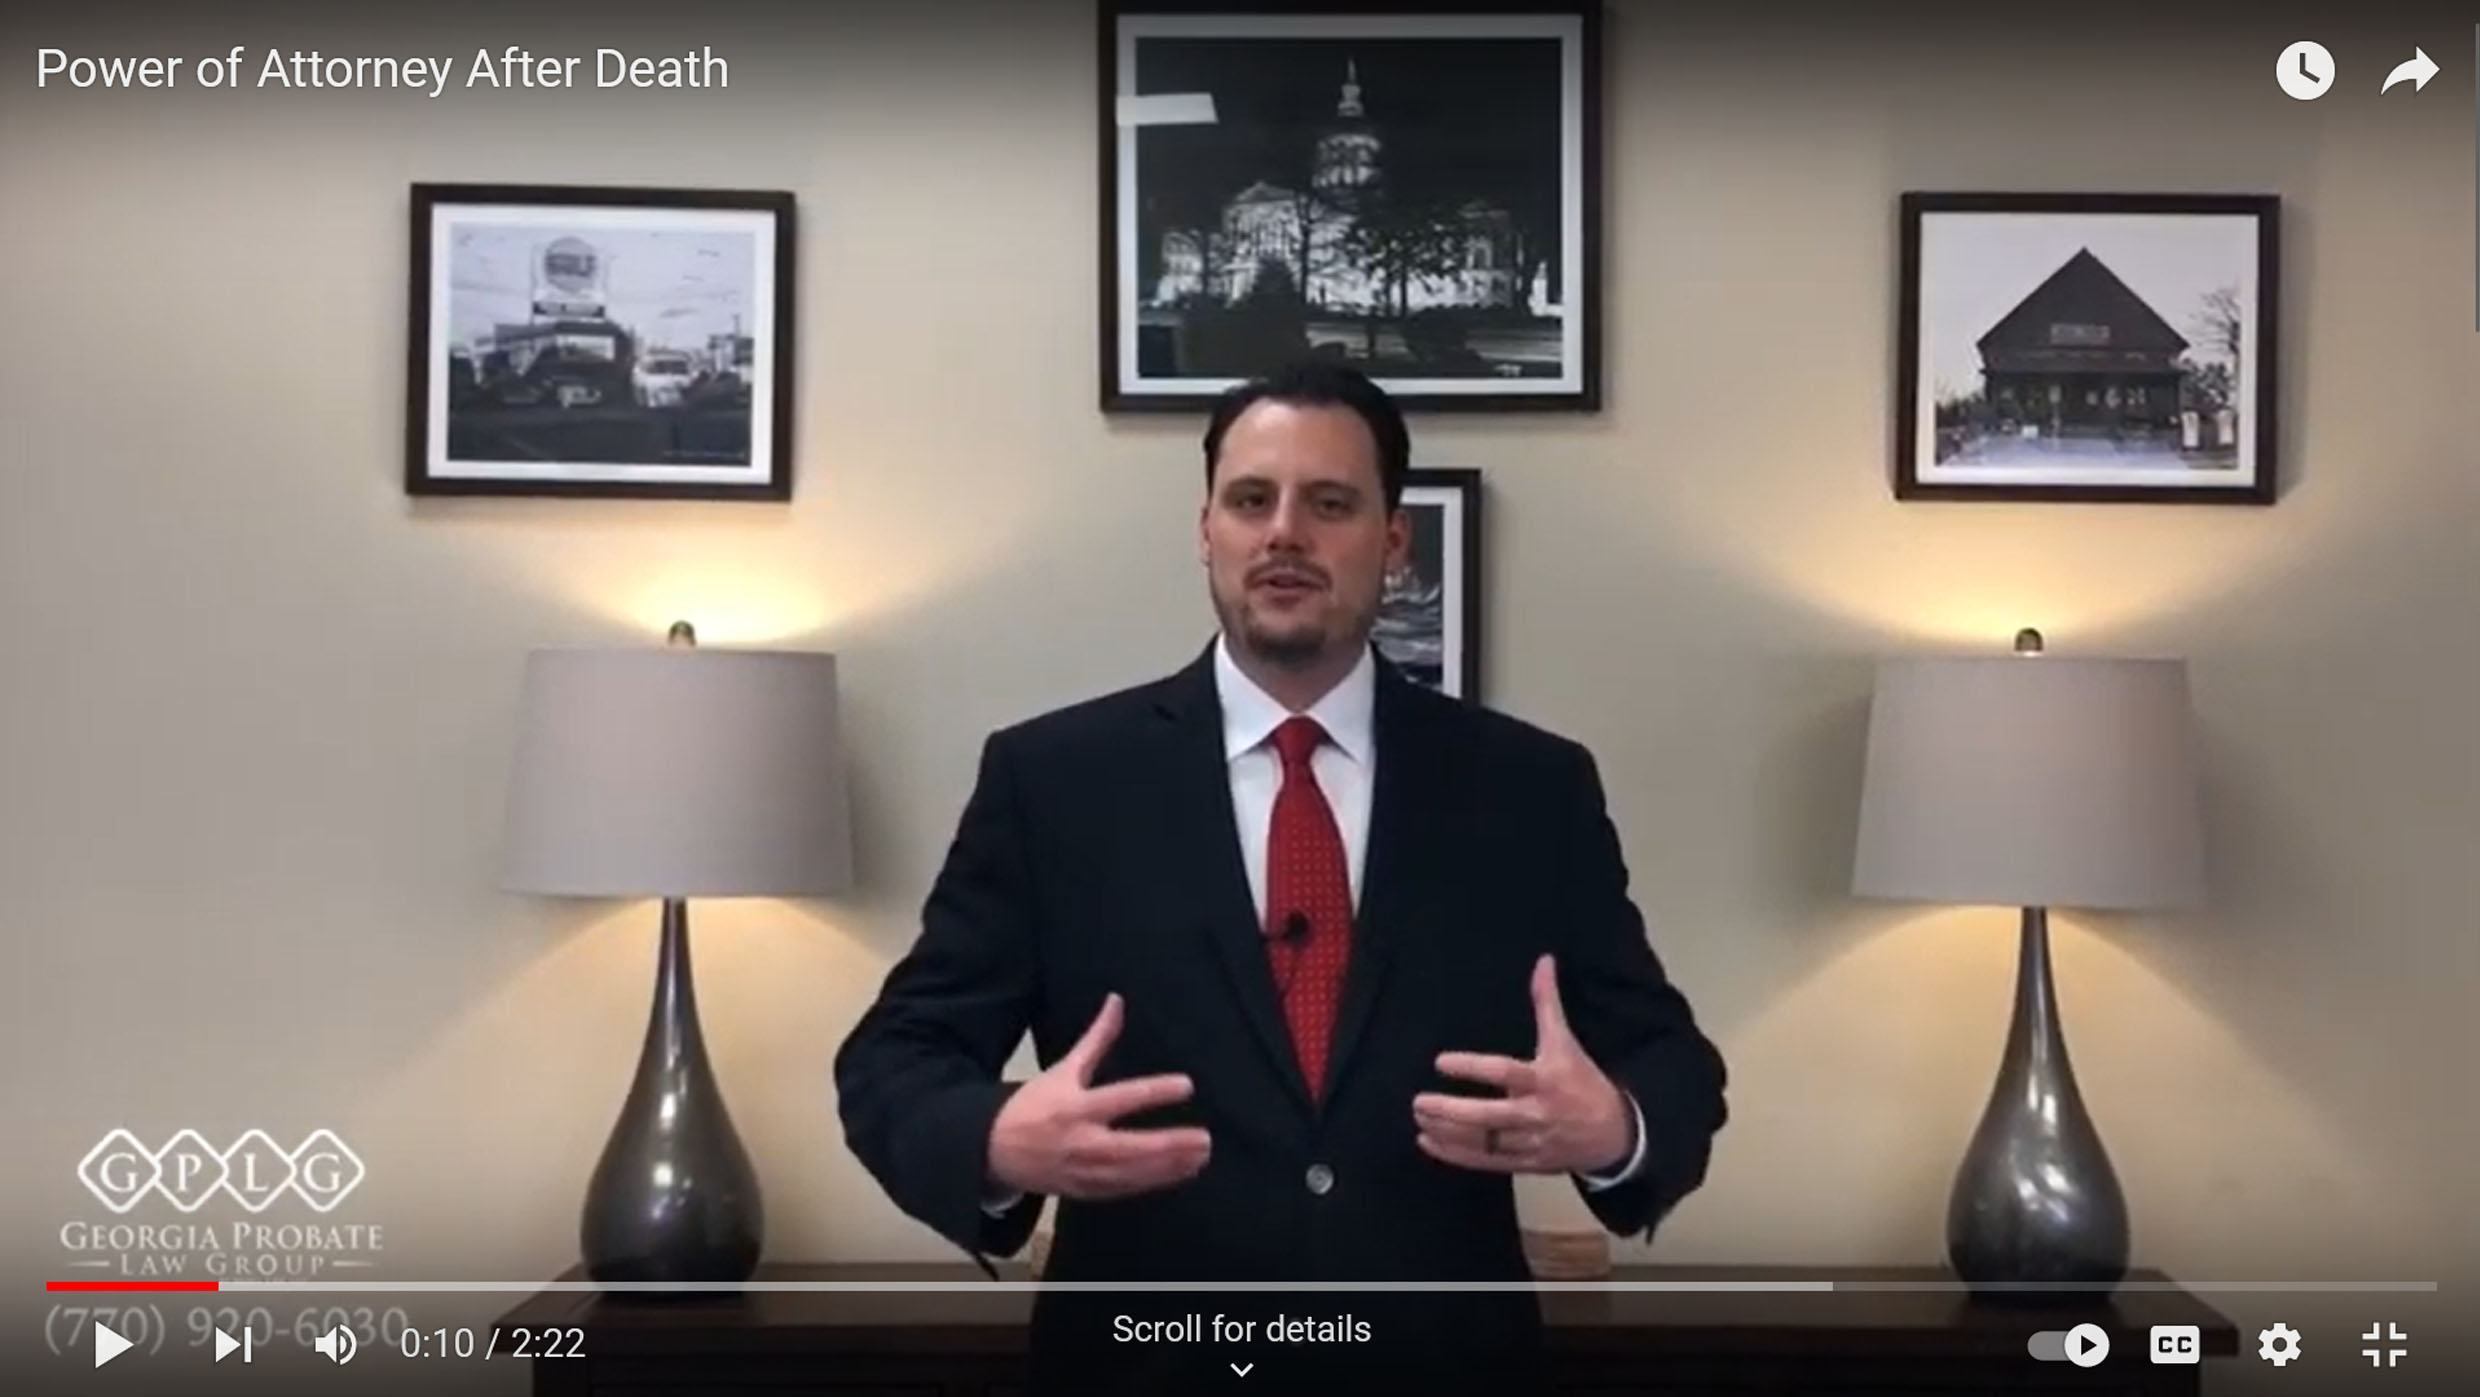 https://youtu.be/z6q_V6AVB-A- Power-of-attorney-after-deatch 